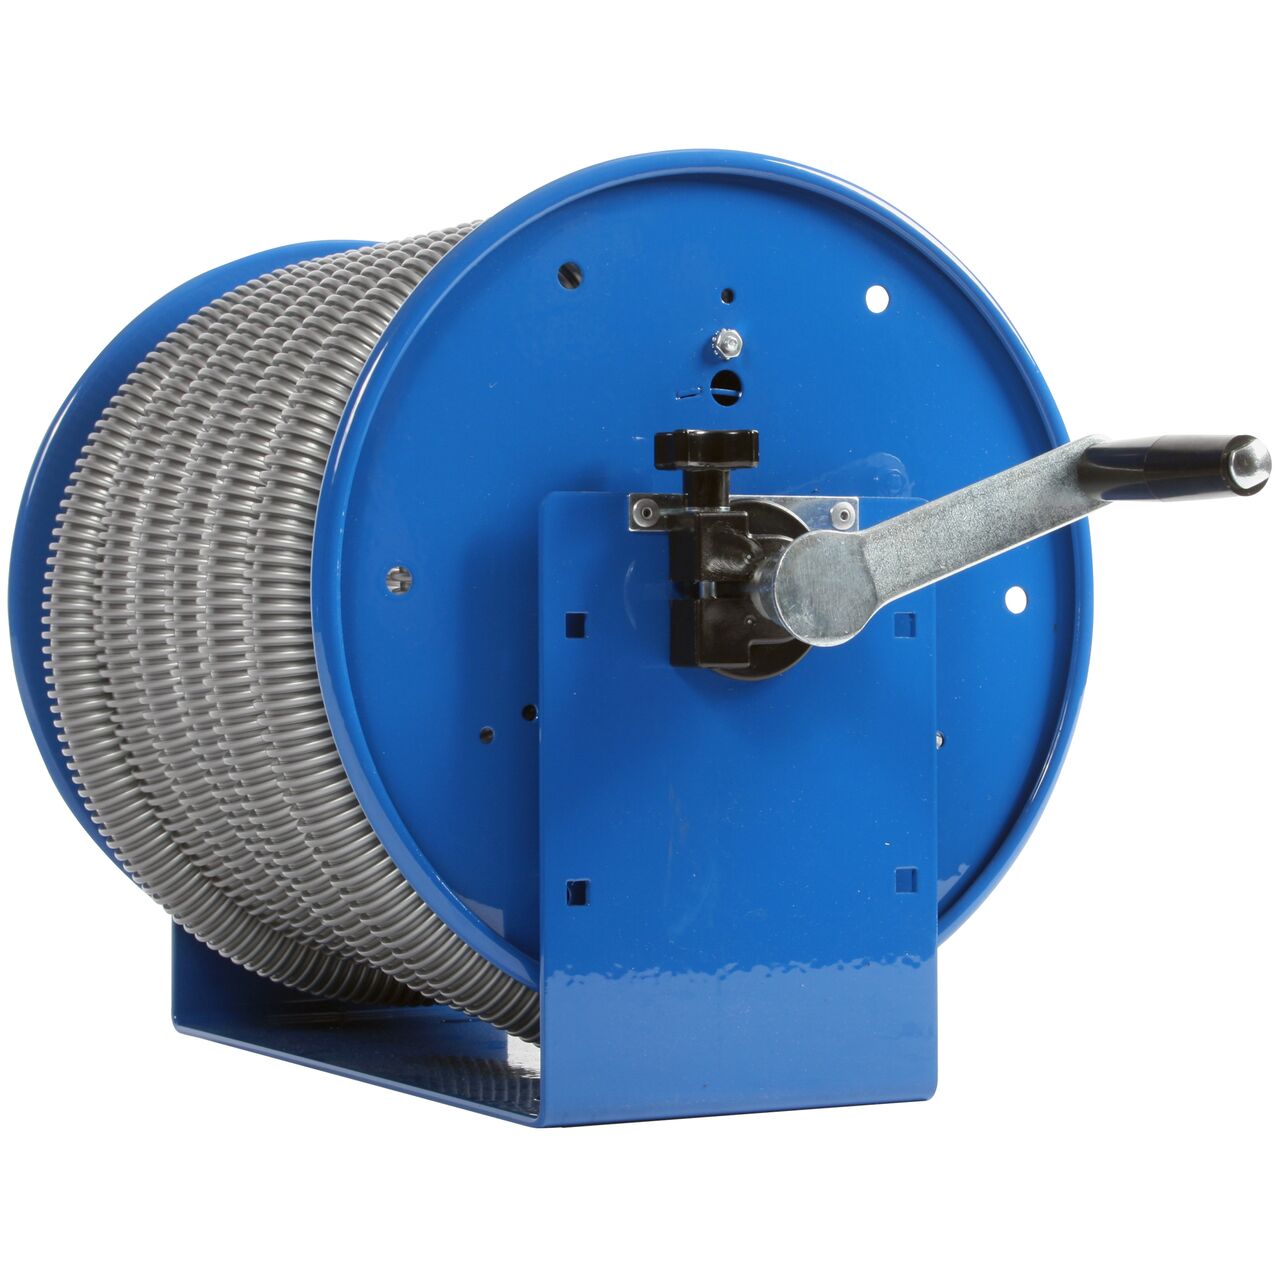 Quick Click Workshop Dust Collection Vacuum Hose Reel Kit - Central  Technology Systems